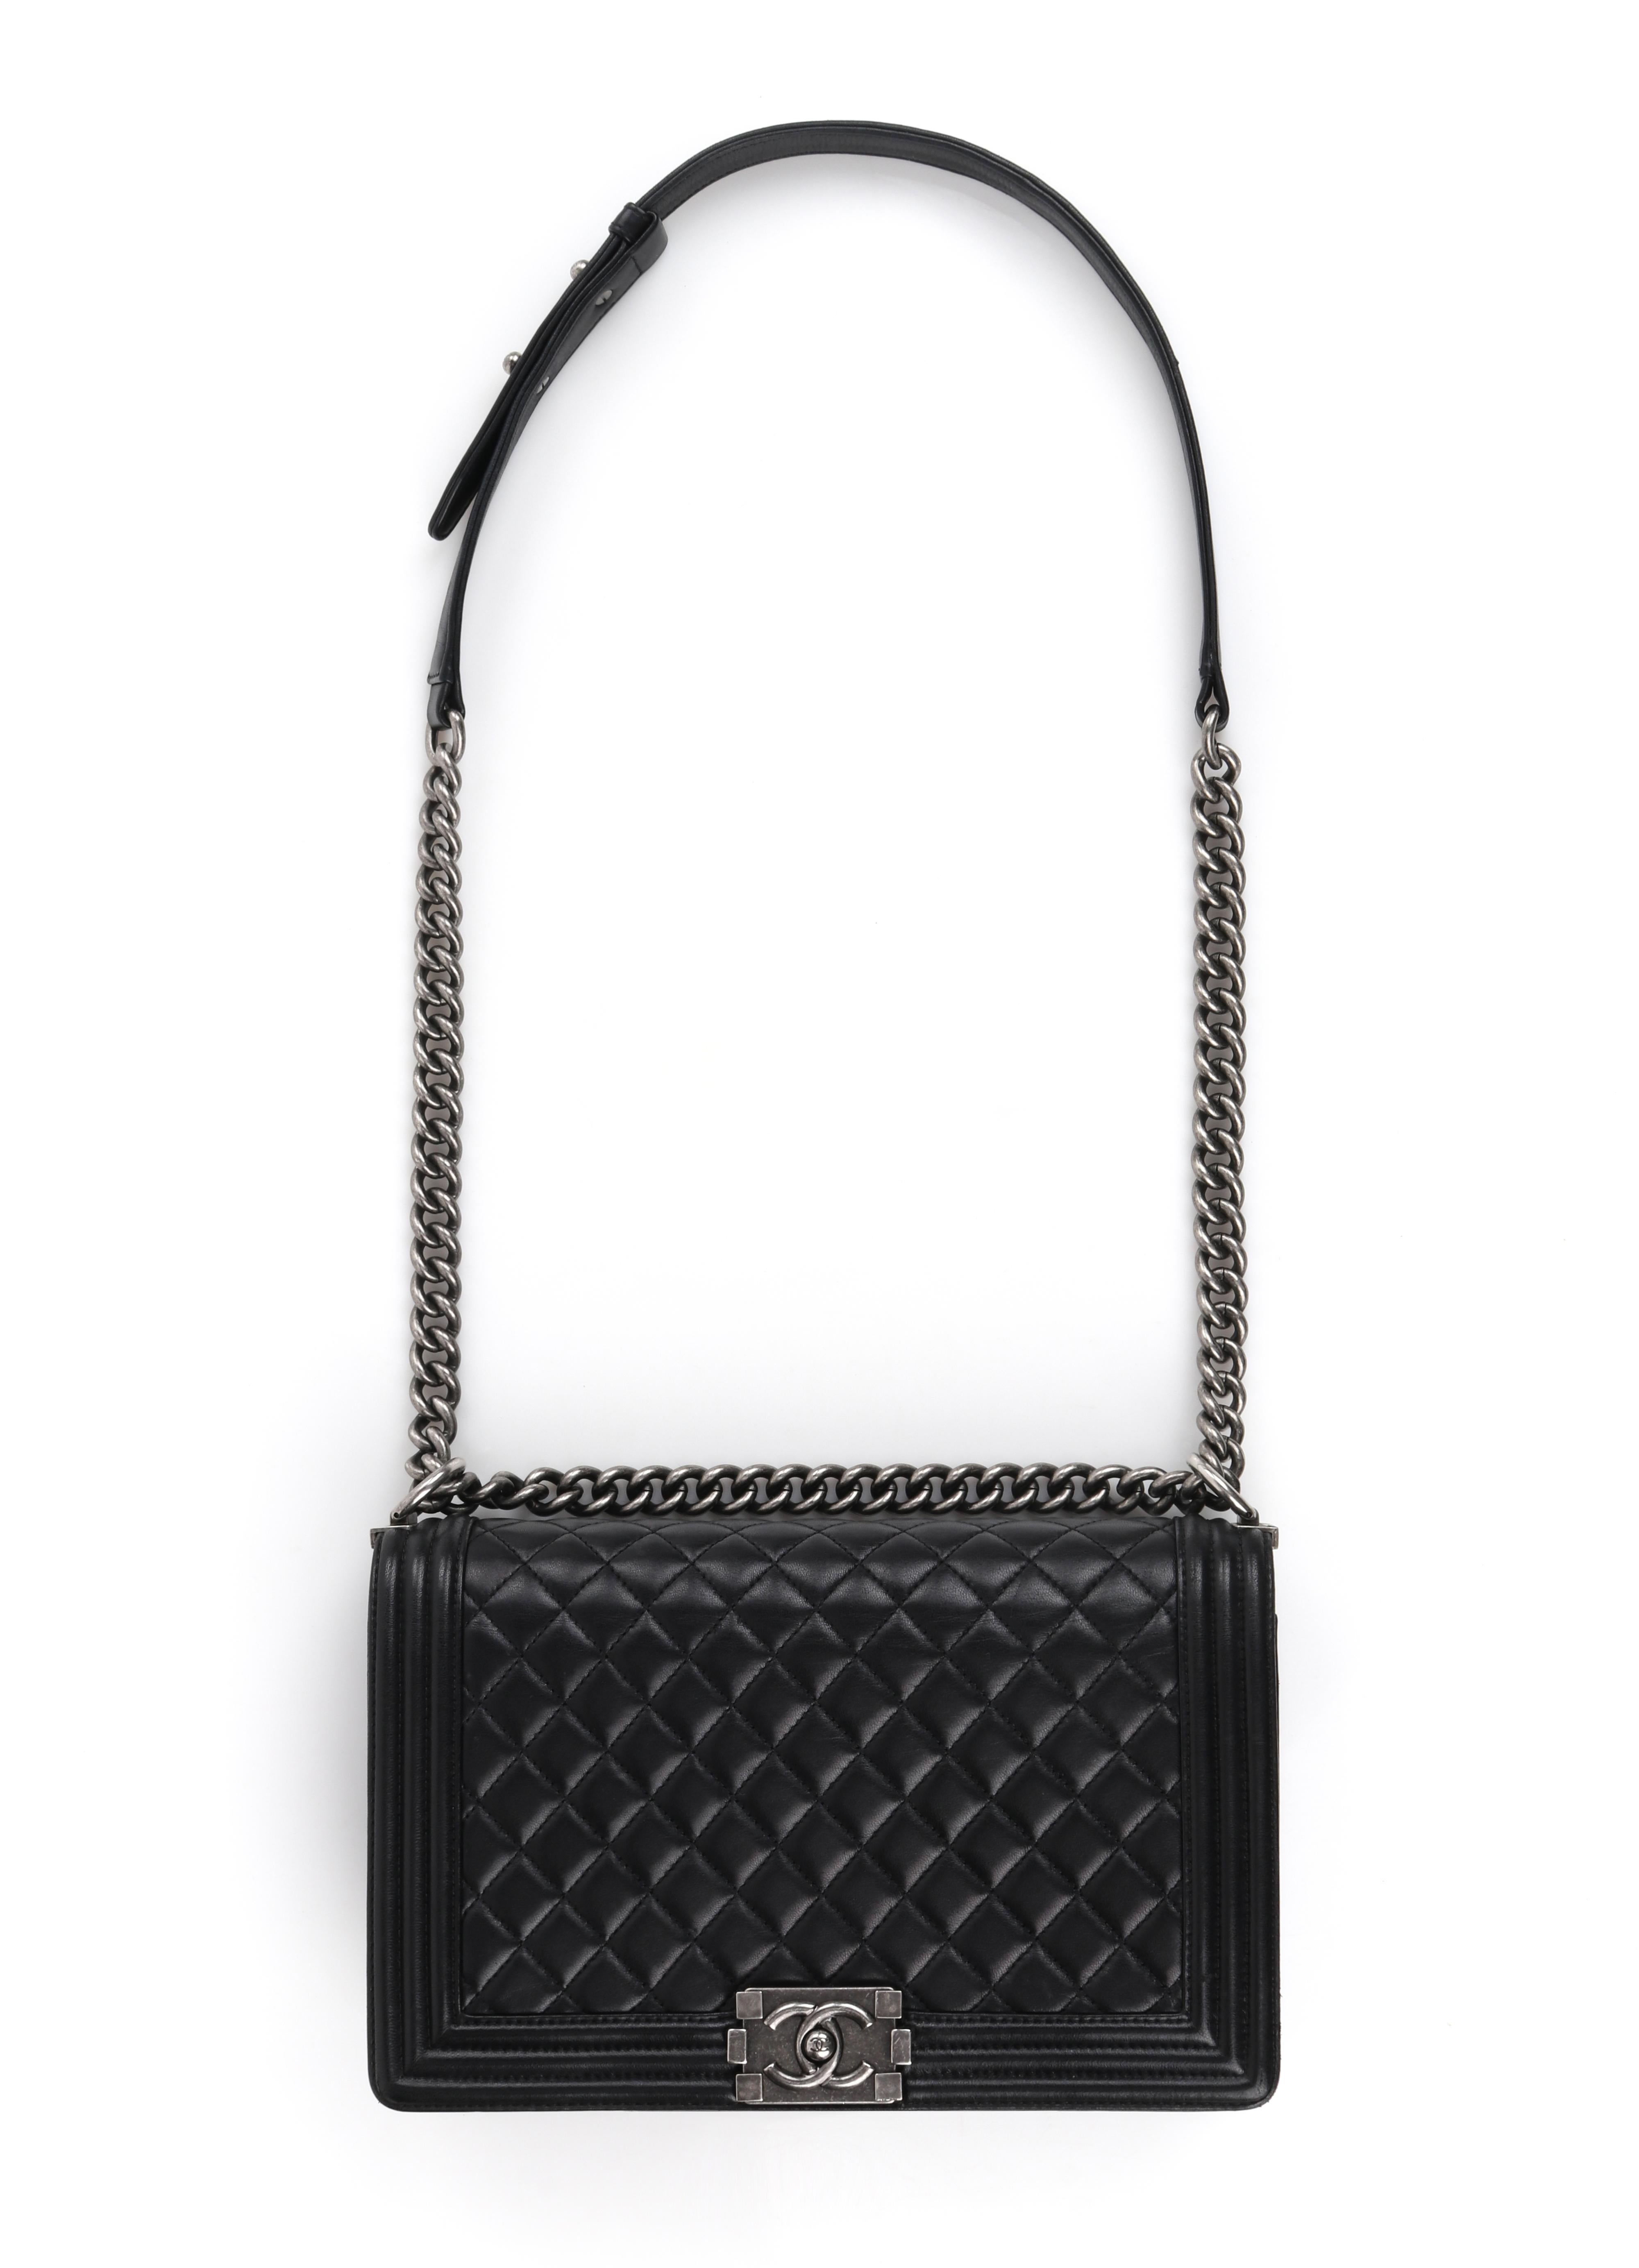 CHANEL c.2018 “Boy” Large Black Quilted Leather Flap Chain Strap Shoulder Bag
 
Brand/Manufacturer: Chanel
Circa: 2017/2018
Collection: Boy Chanel
Style: Shoulder bag
Color(s): Black and Silver
Lined: Yes
Unmarked Fabric Content (feel of): Calfskin